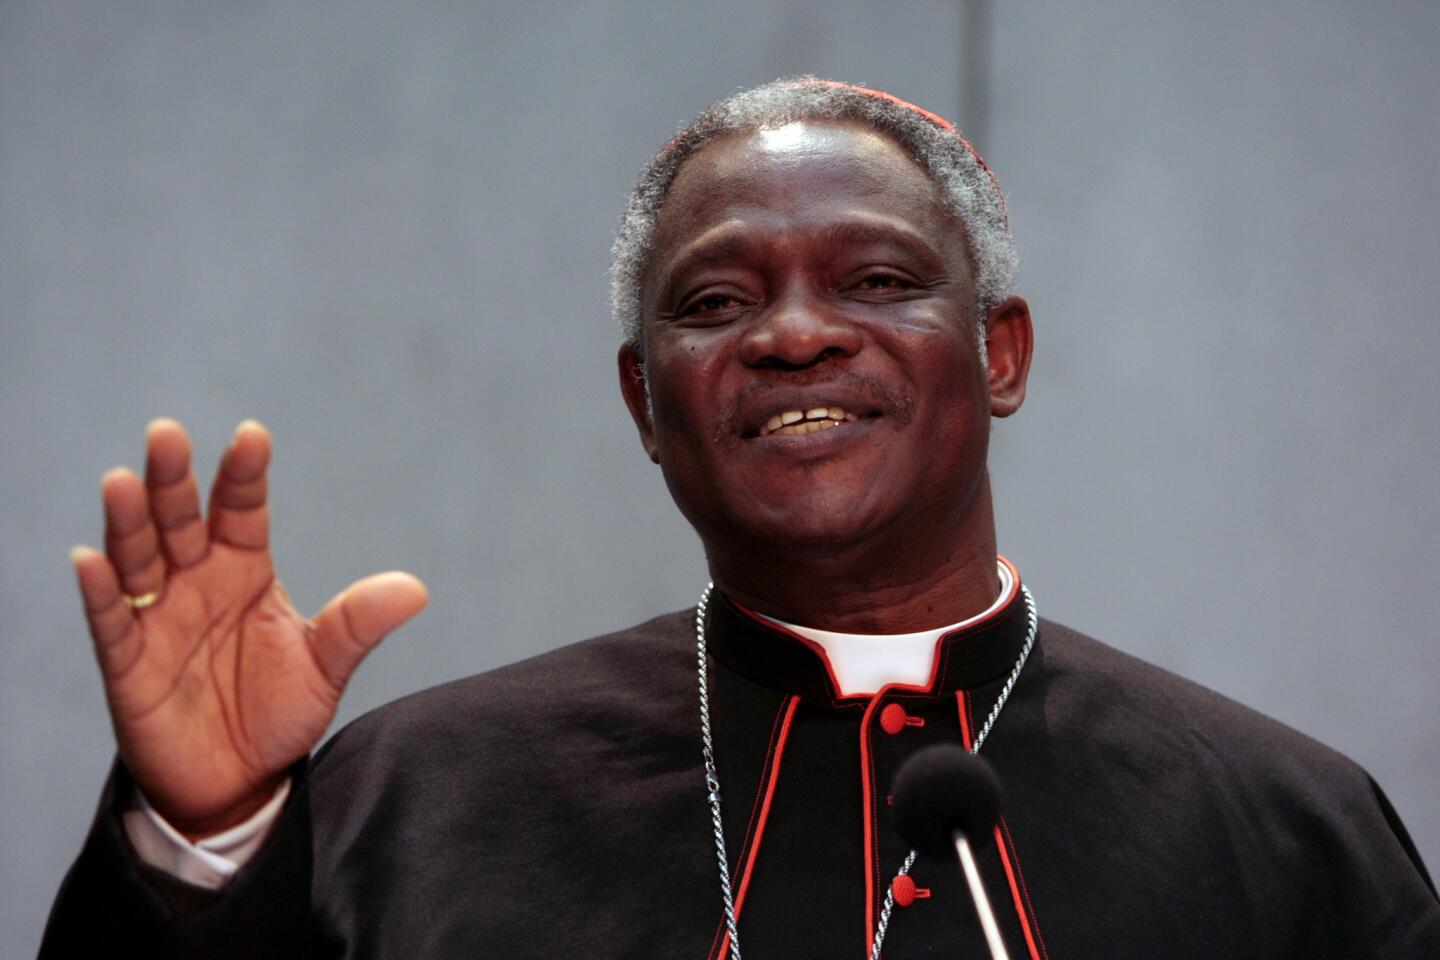 Peter Kodwo Appiah Turkson of Ghana is an African prelate seen as a top contender, and at 64 would be better positioned than older candidates to carry on the doctrine of John Paul II and Benedict XVI through what could be a time of growing Catholic influence in the developing world. Currently president of the Pontifical Council for Justice and Peace, Turkson has spent much of his career in religious academia. He has a doctorate in sacred scripture and has been a professor at St. Teresa's Seminary in his home country as well as vice rector at St. Peter's Seminary. His negative views on the merits of using condoms to prevent the spread of HIV/AIDS, though, have alienated reformists within the church. In 2009, he reaffirmed the church's position against contraception, urging abstinence and fidelity instead.